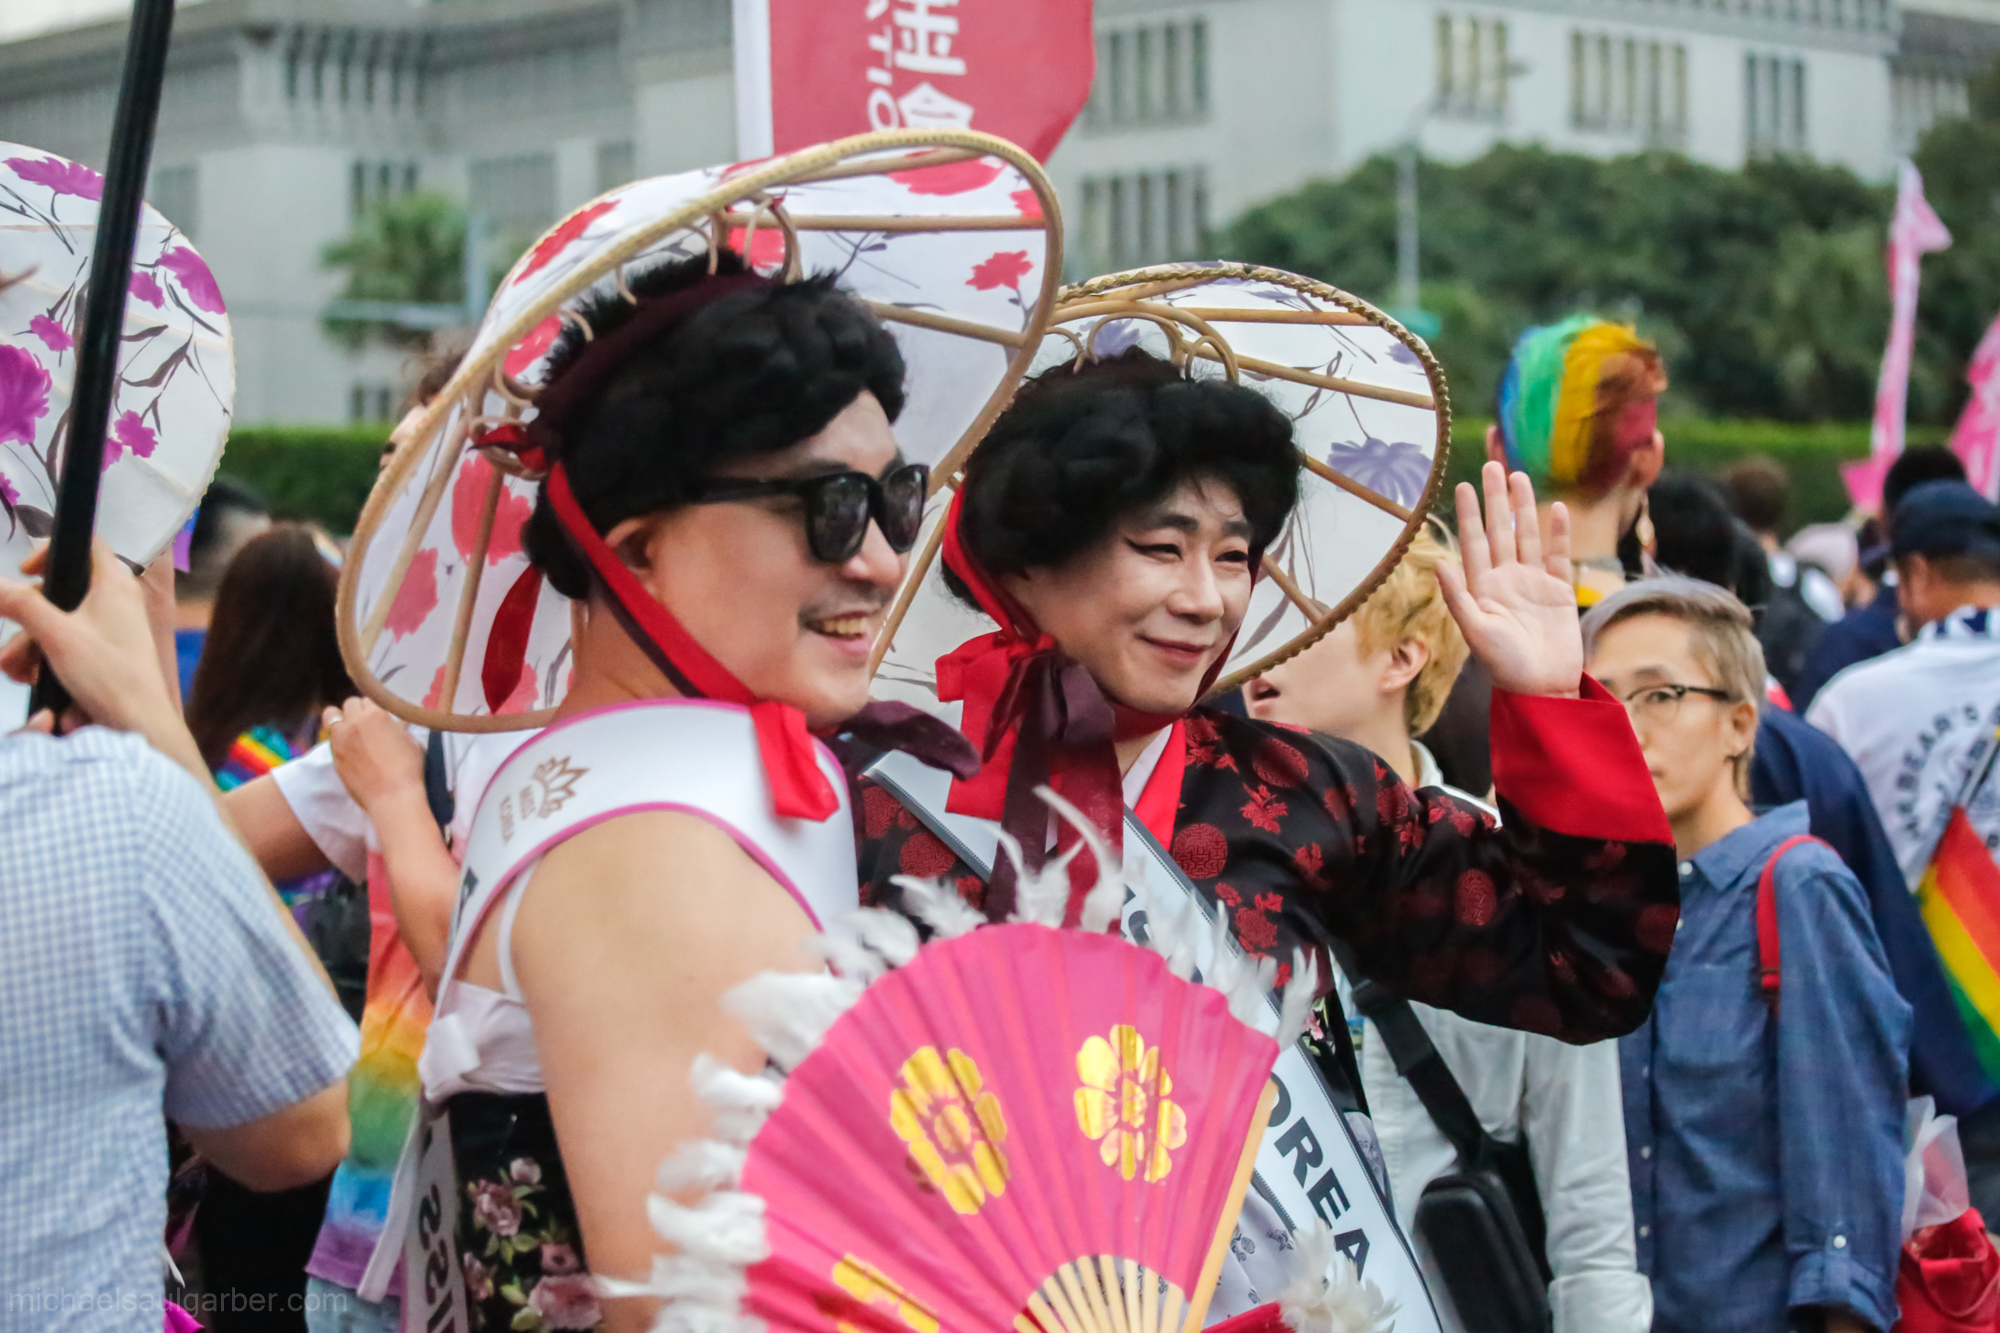 Korean supporters marching in Taipei. Many international visitors, especially from nearby Asian countries, join Taiwan's annual Pride parade, Taiwan Pride, 2016